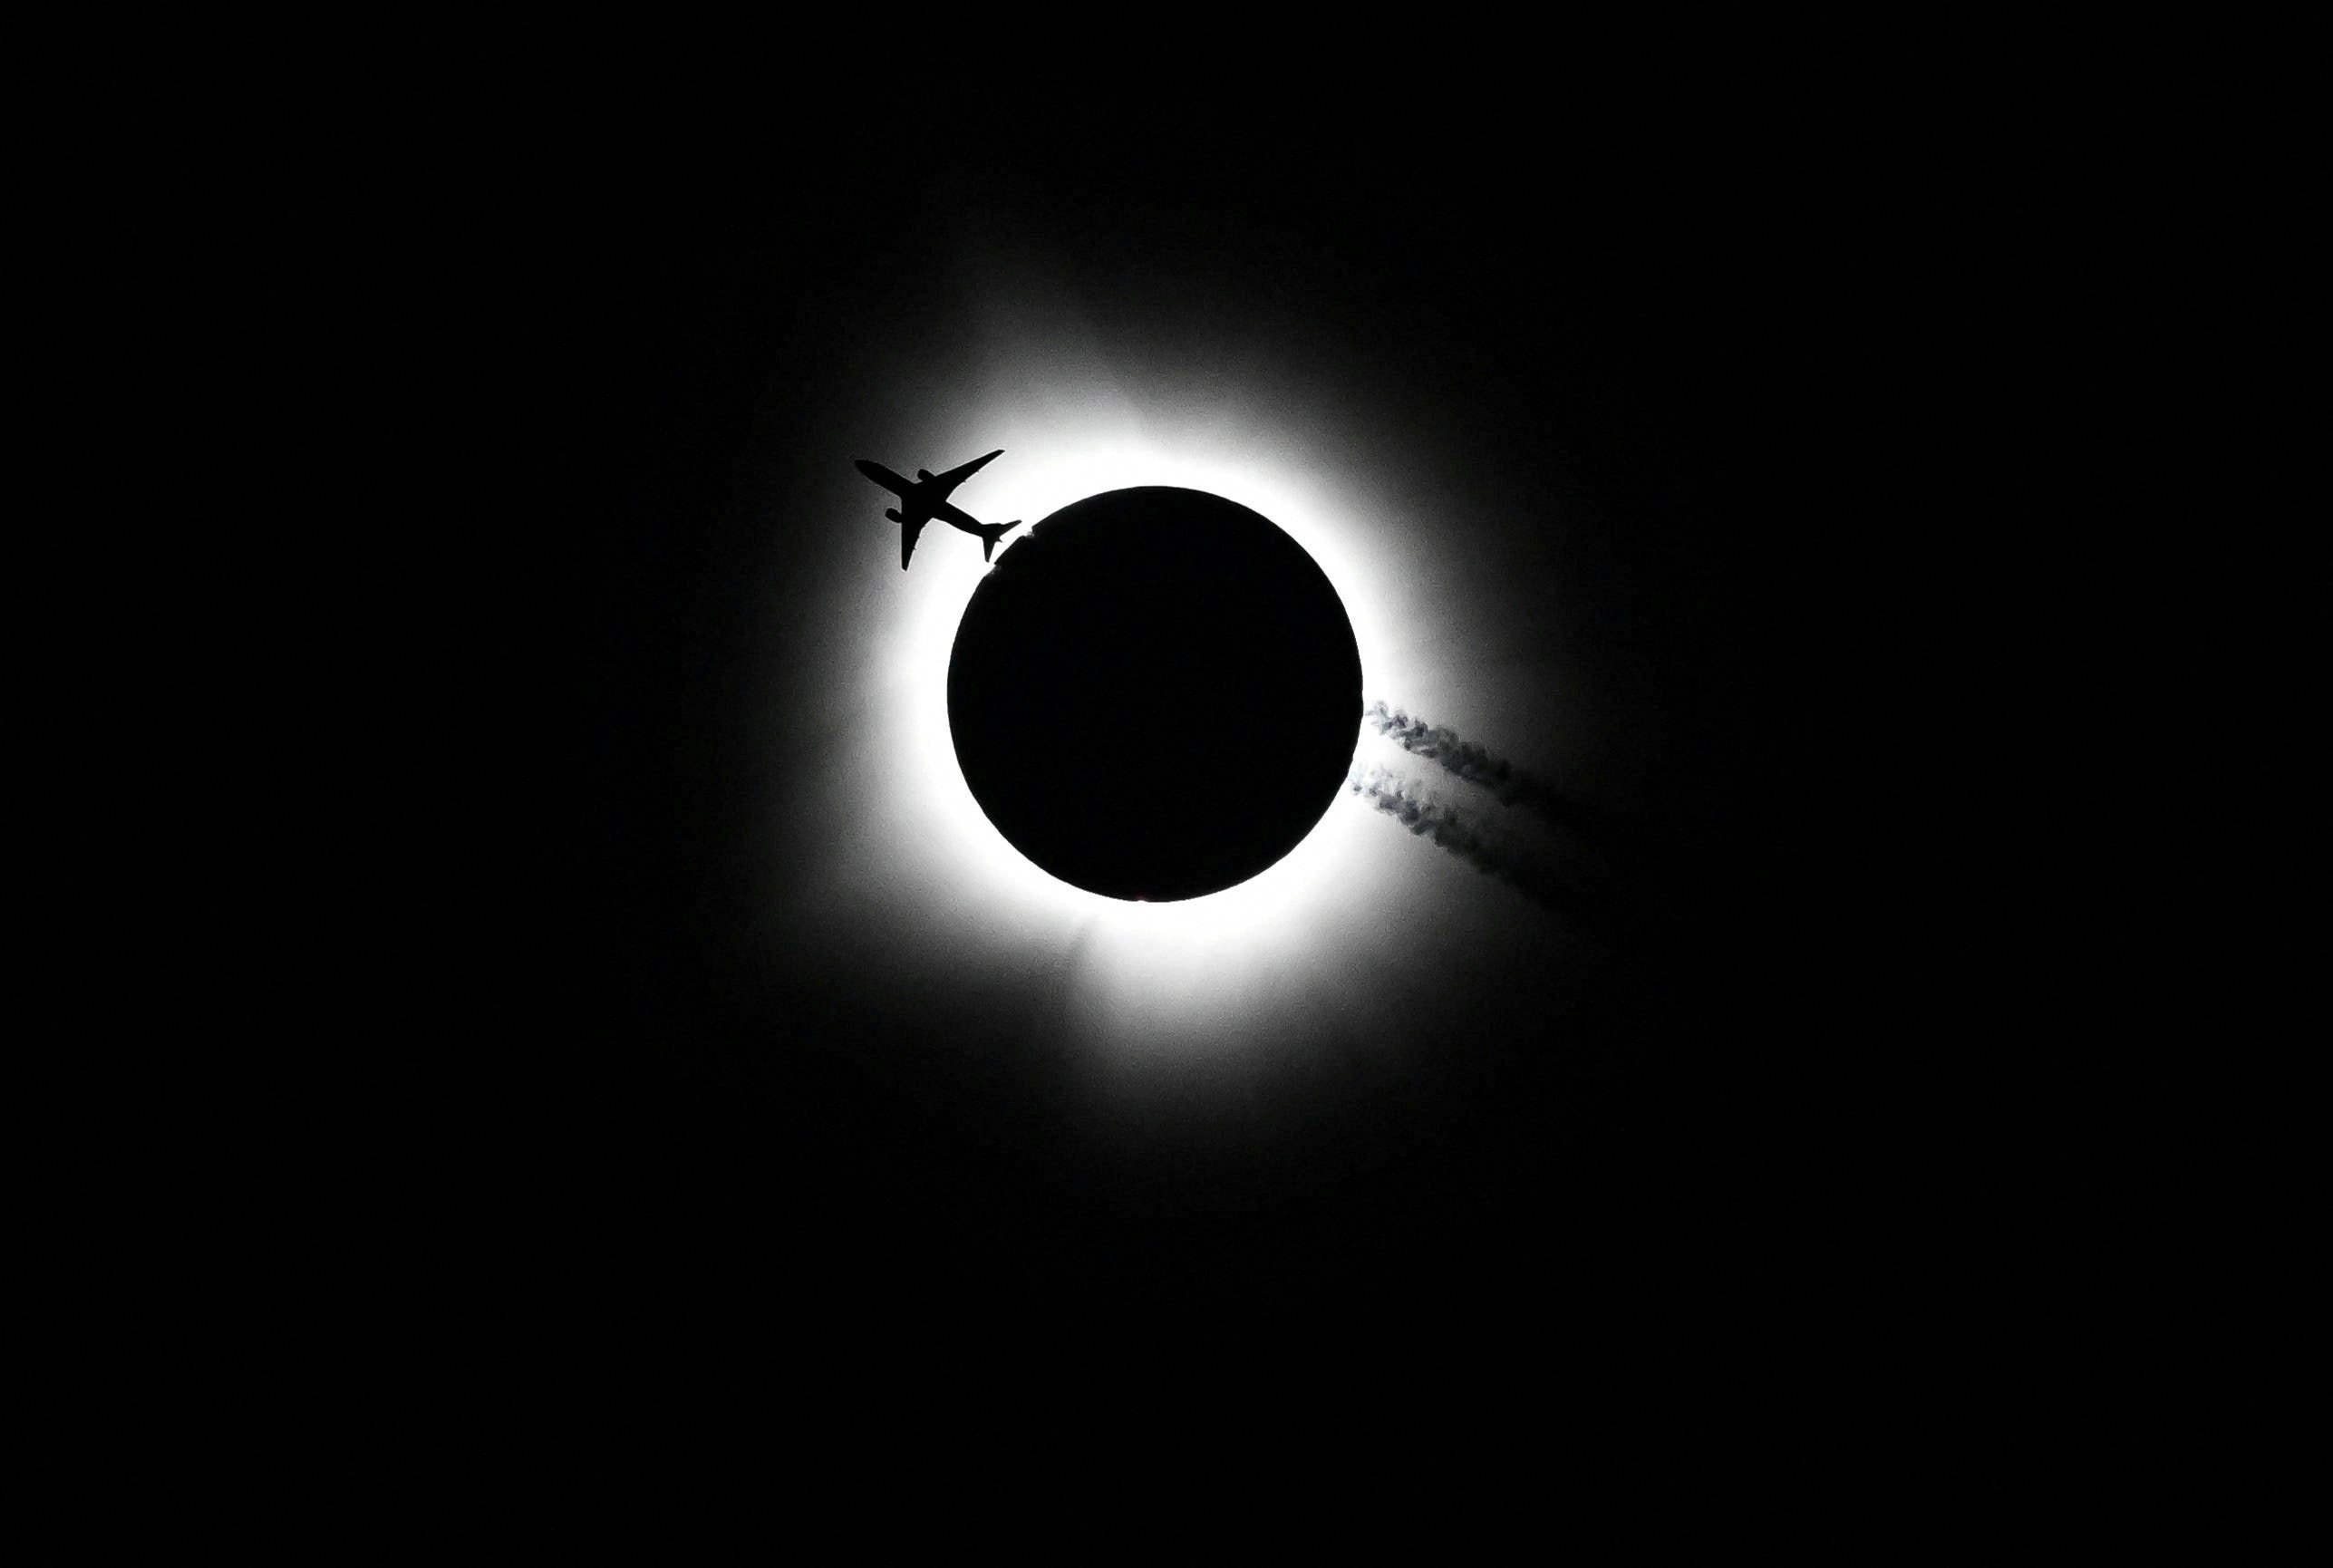 A plane passes near the total solar eclipse over Bloomington, Indiana. Photo: Bobby Goddin/USA Today Network via Reuters